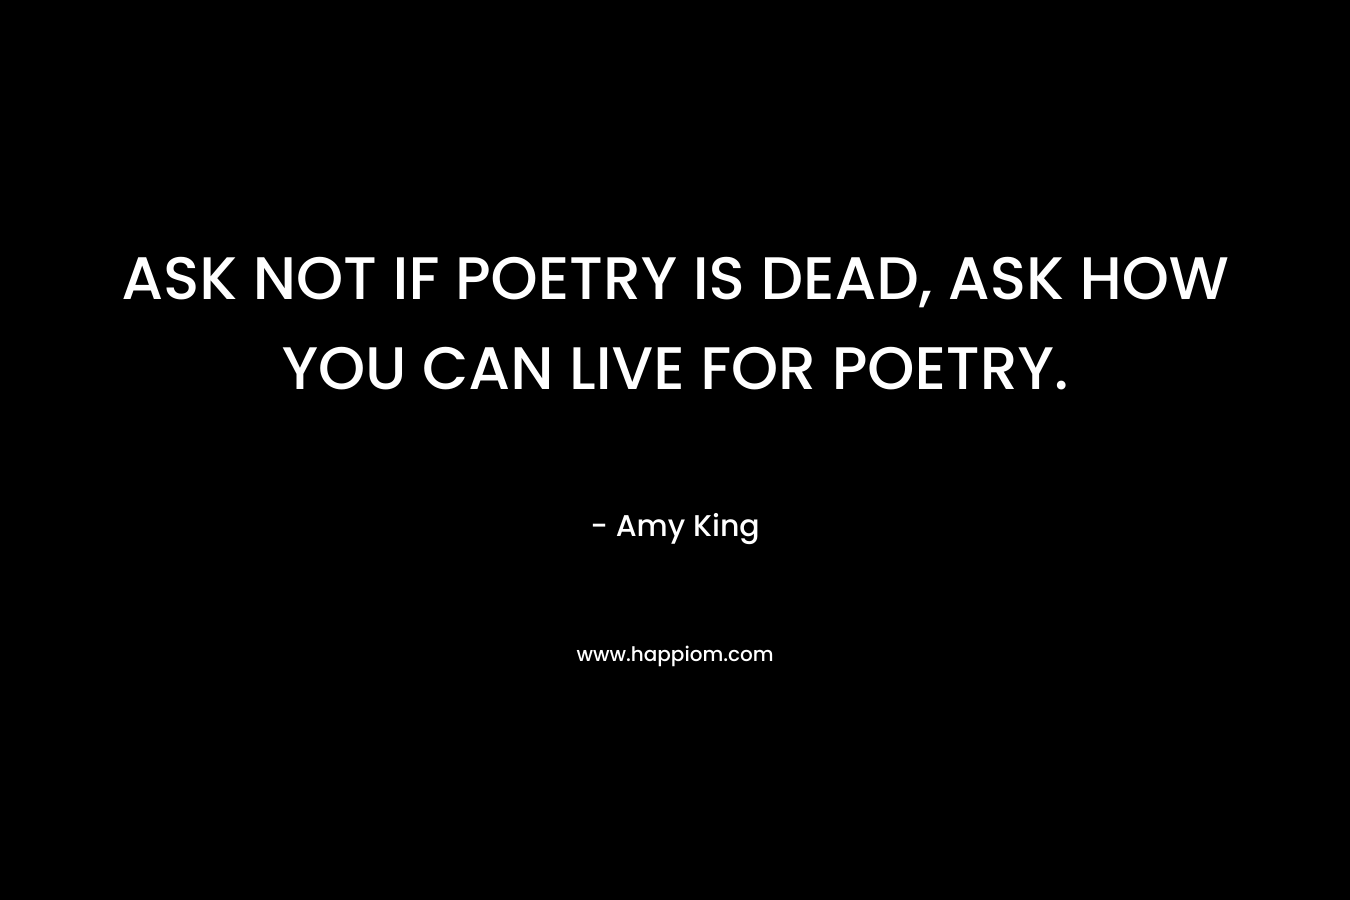 ASK NOT IF POETRY IS DEAD, ASK HOW YOU CAN LIVE FOR POETRY.